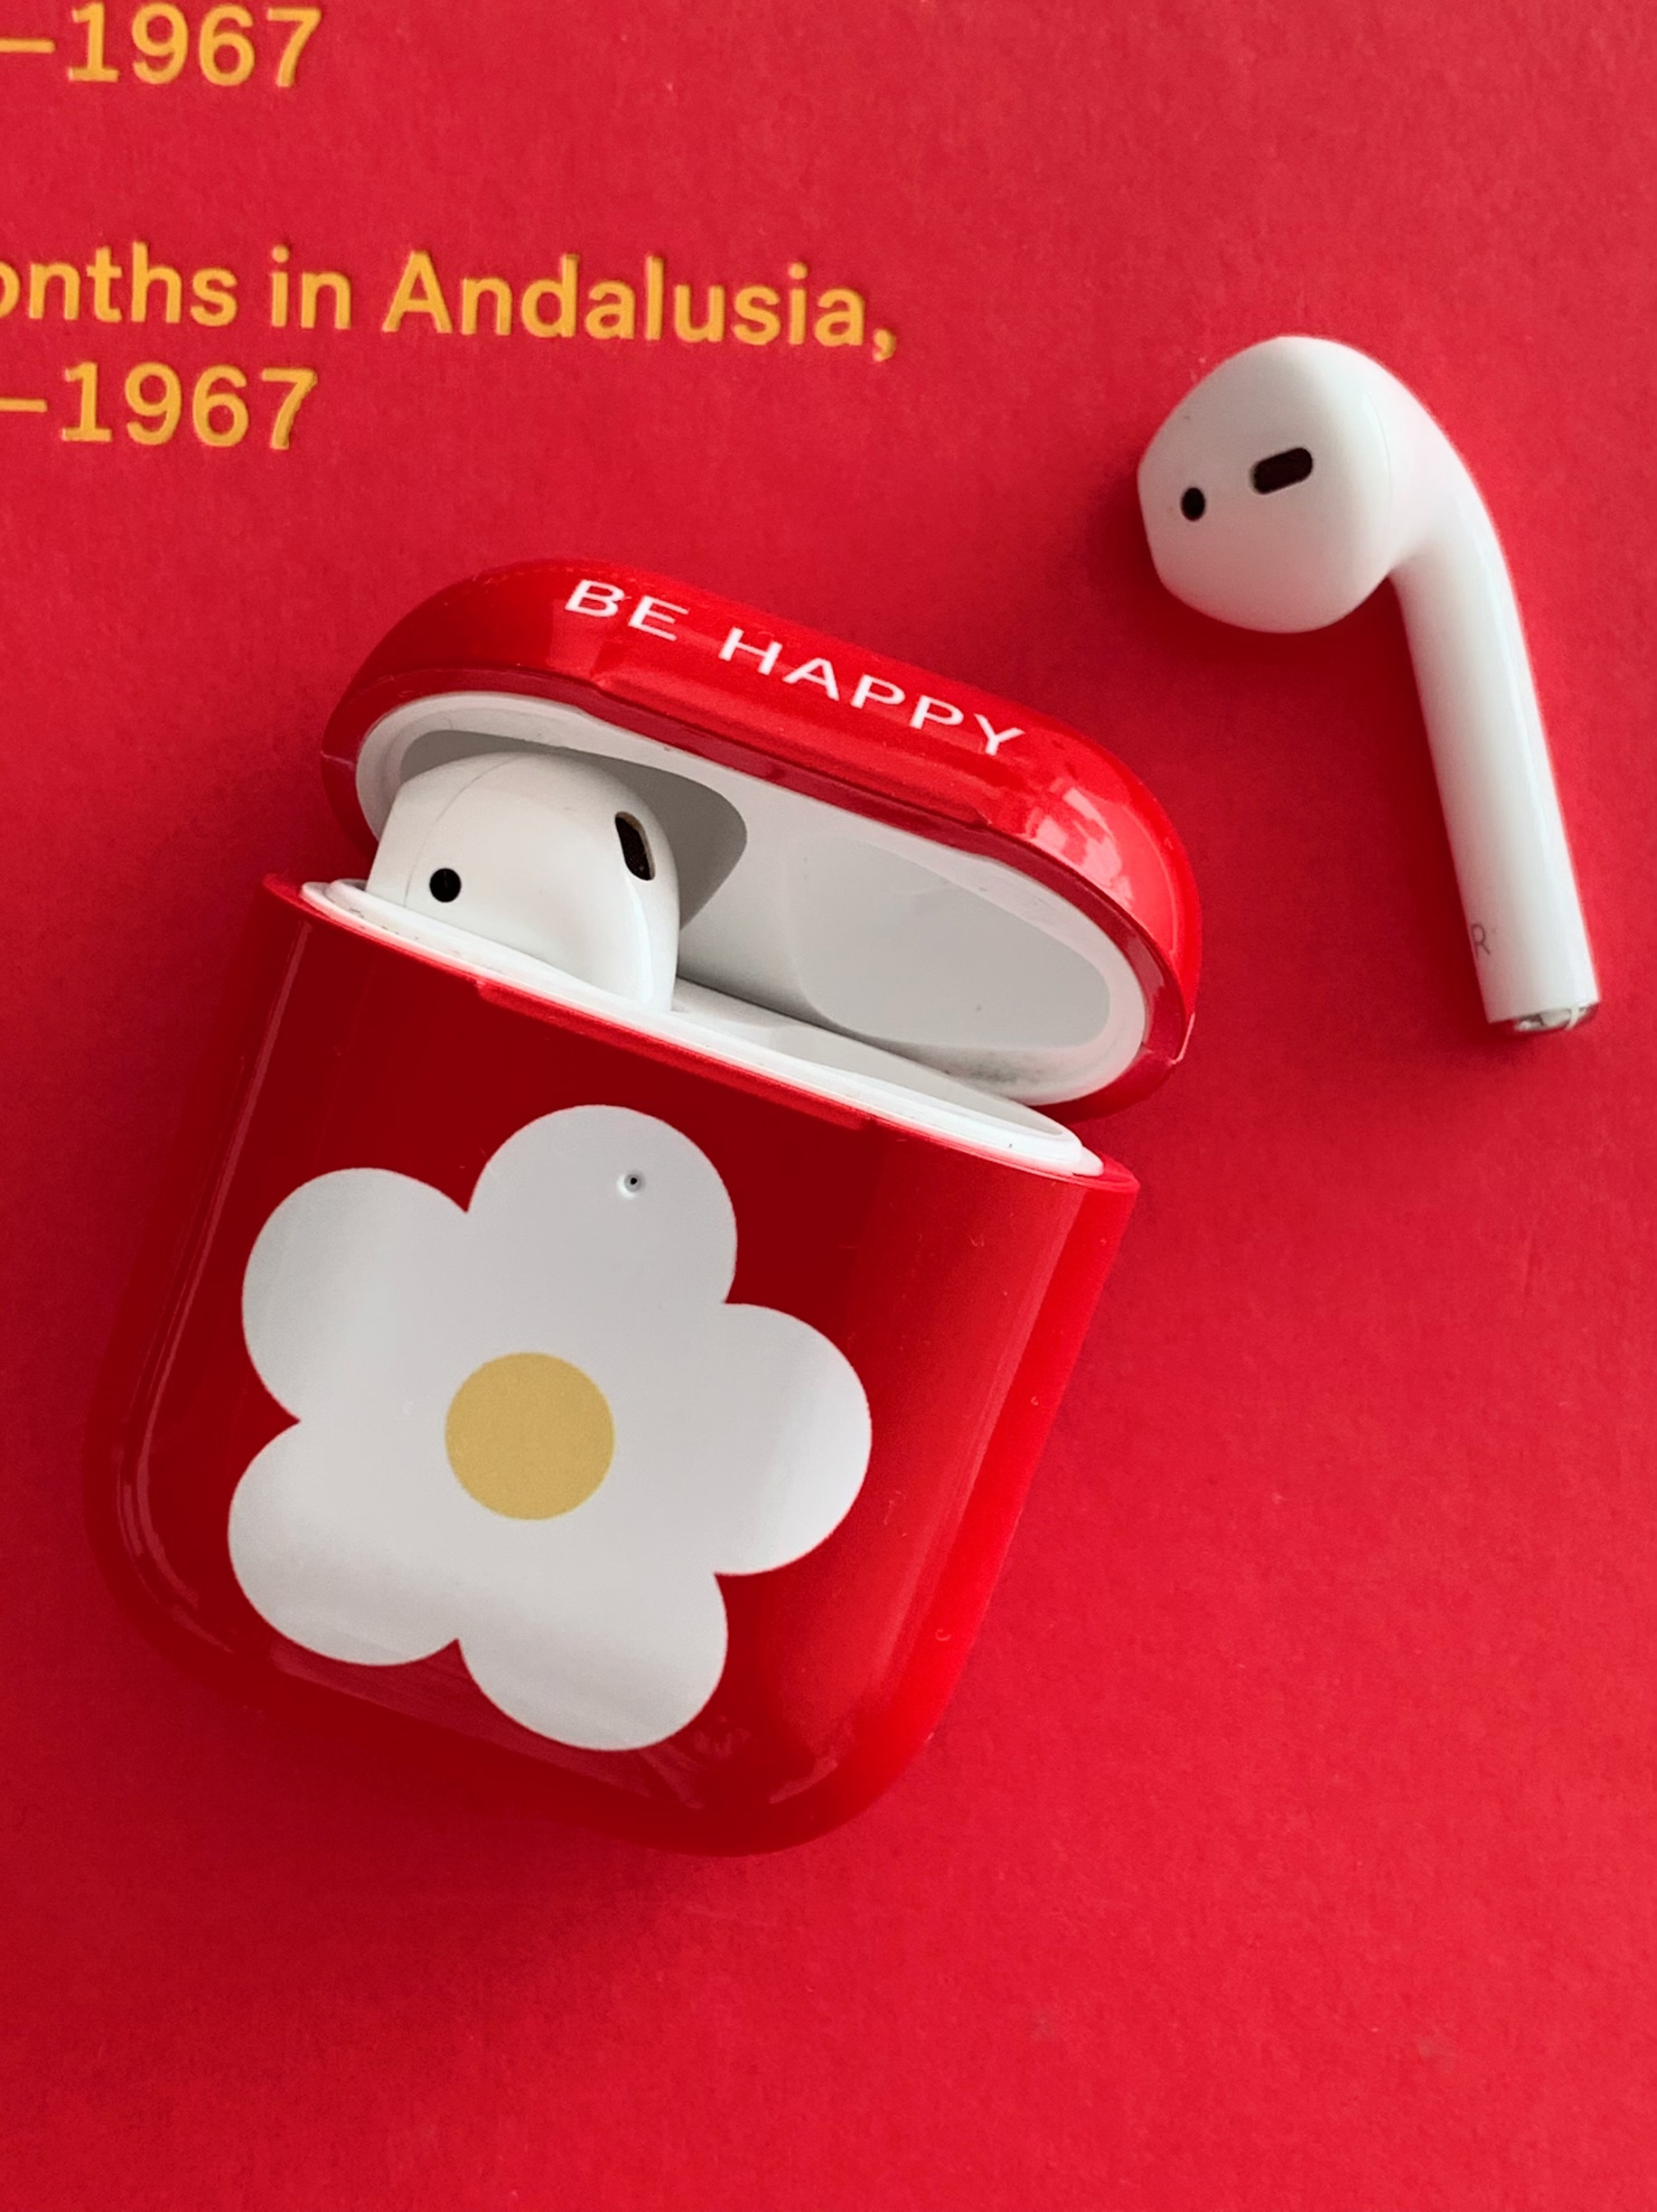 Be happy [ Red : Airpods ]